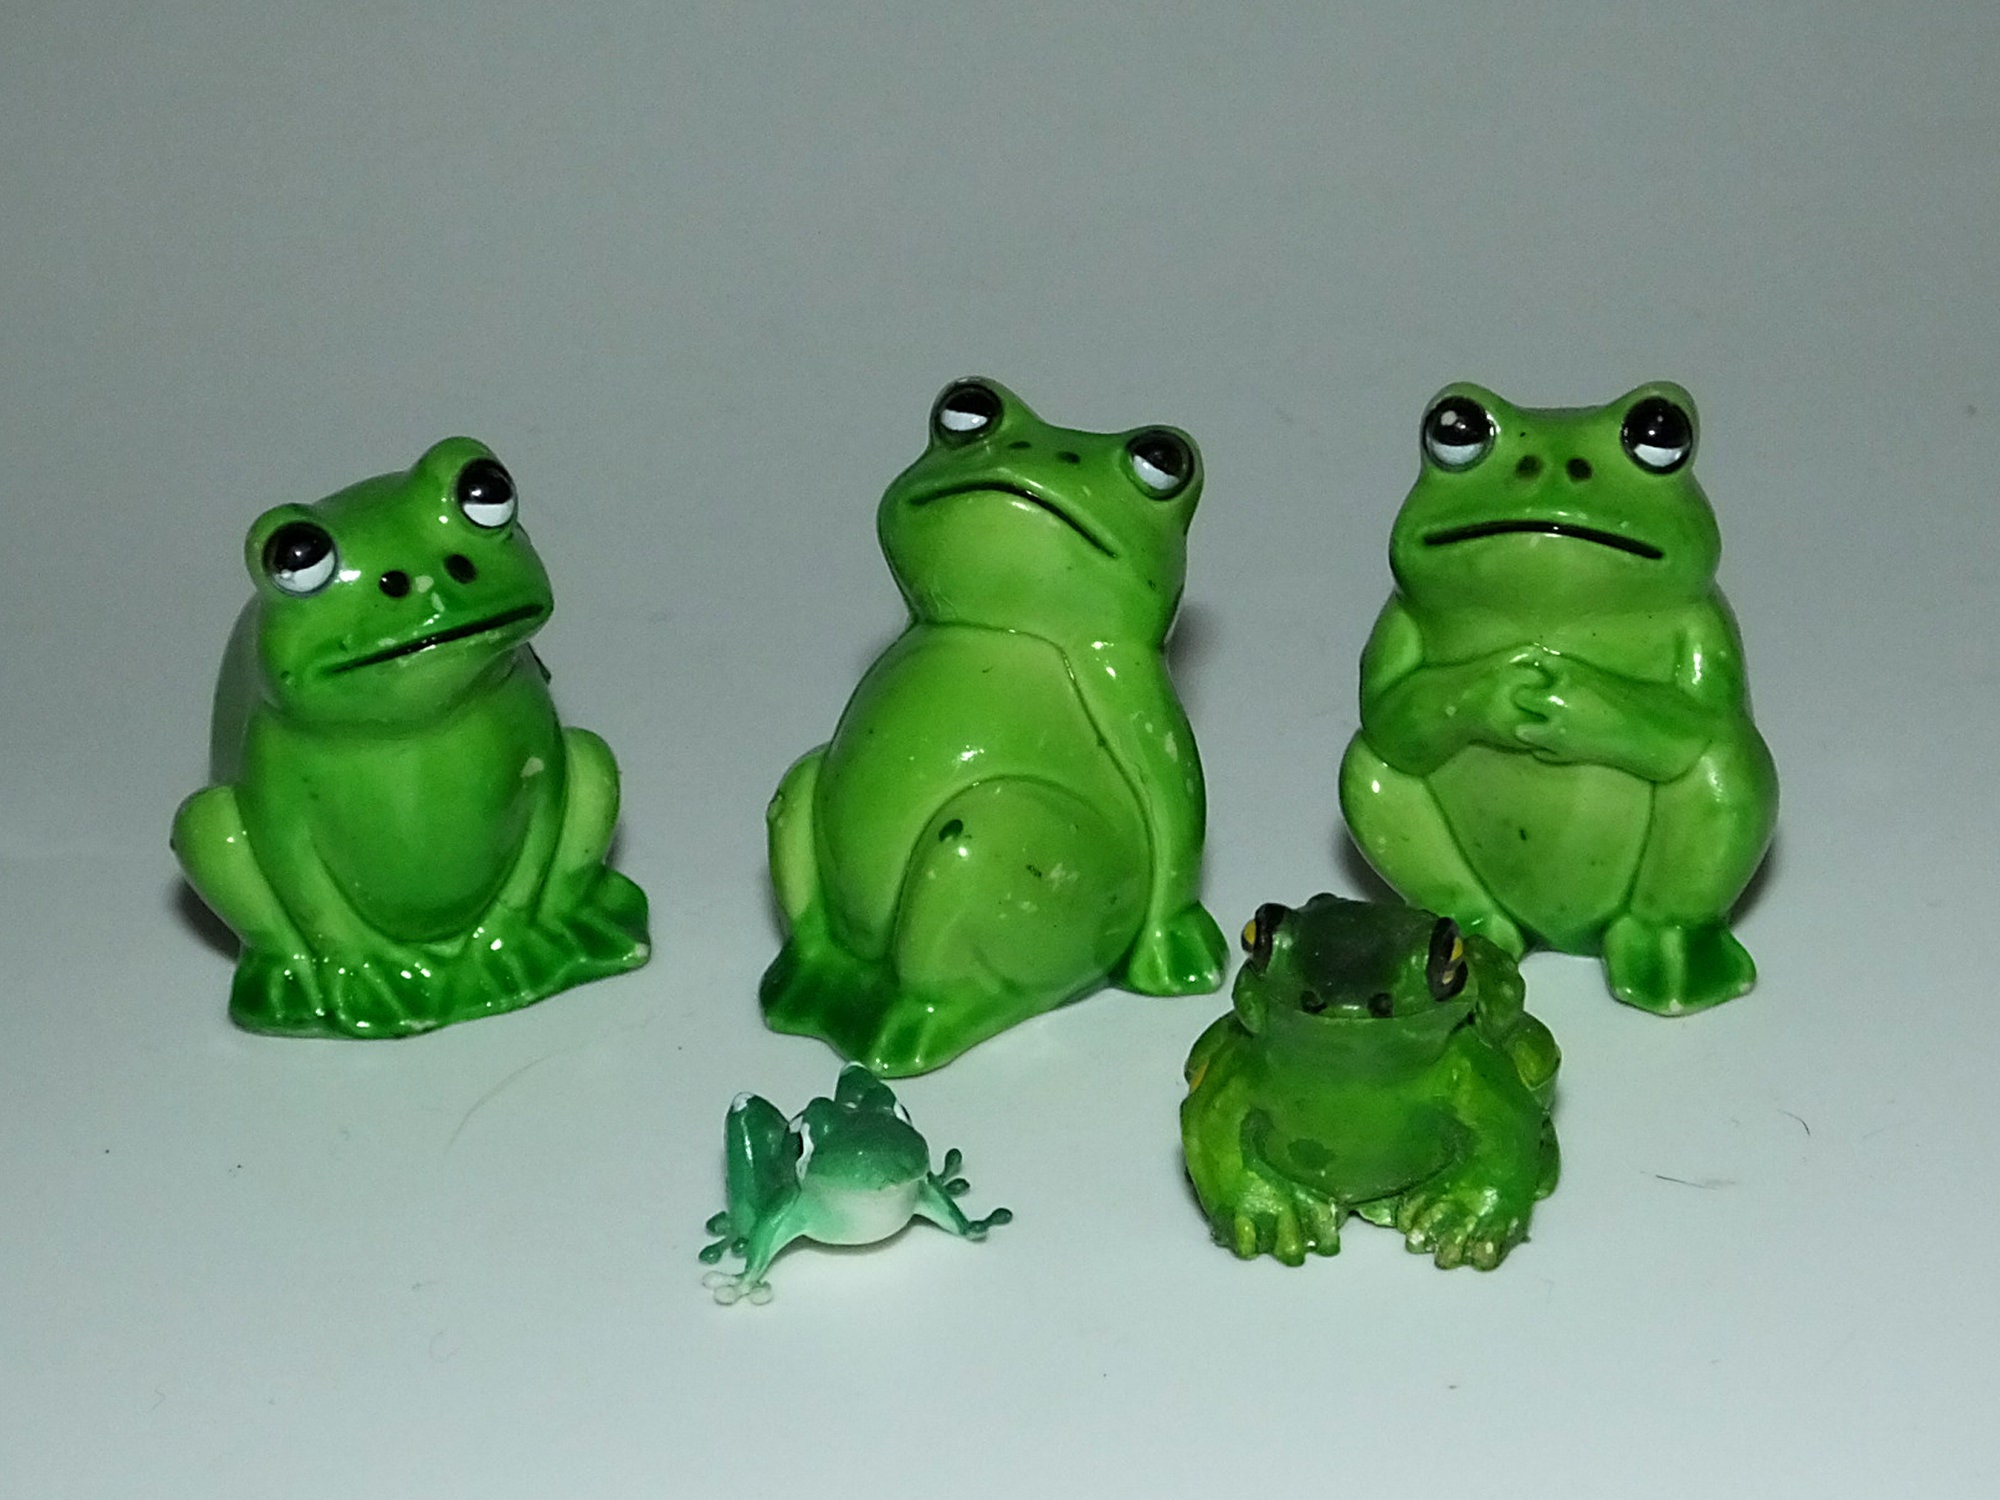 3pc FIBRE-CRAFT Vintage Plastic FRoGS and TuRTLe Miniatures / new old stock  / unopened package / Hong Kong / vintage craft mini miniature